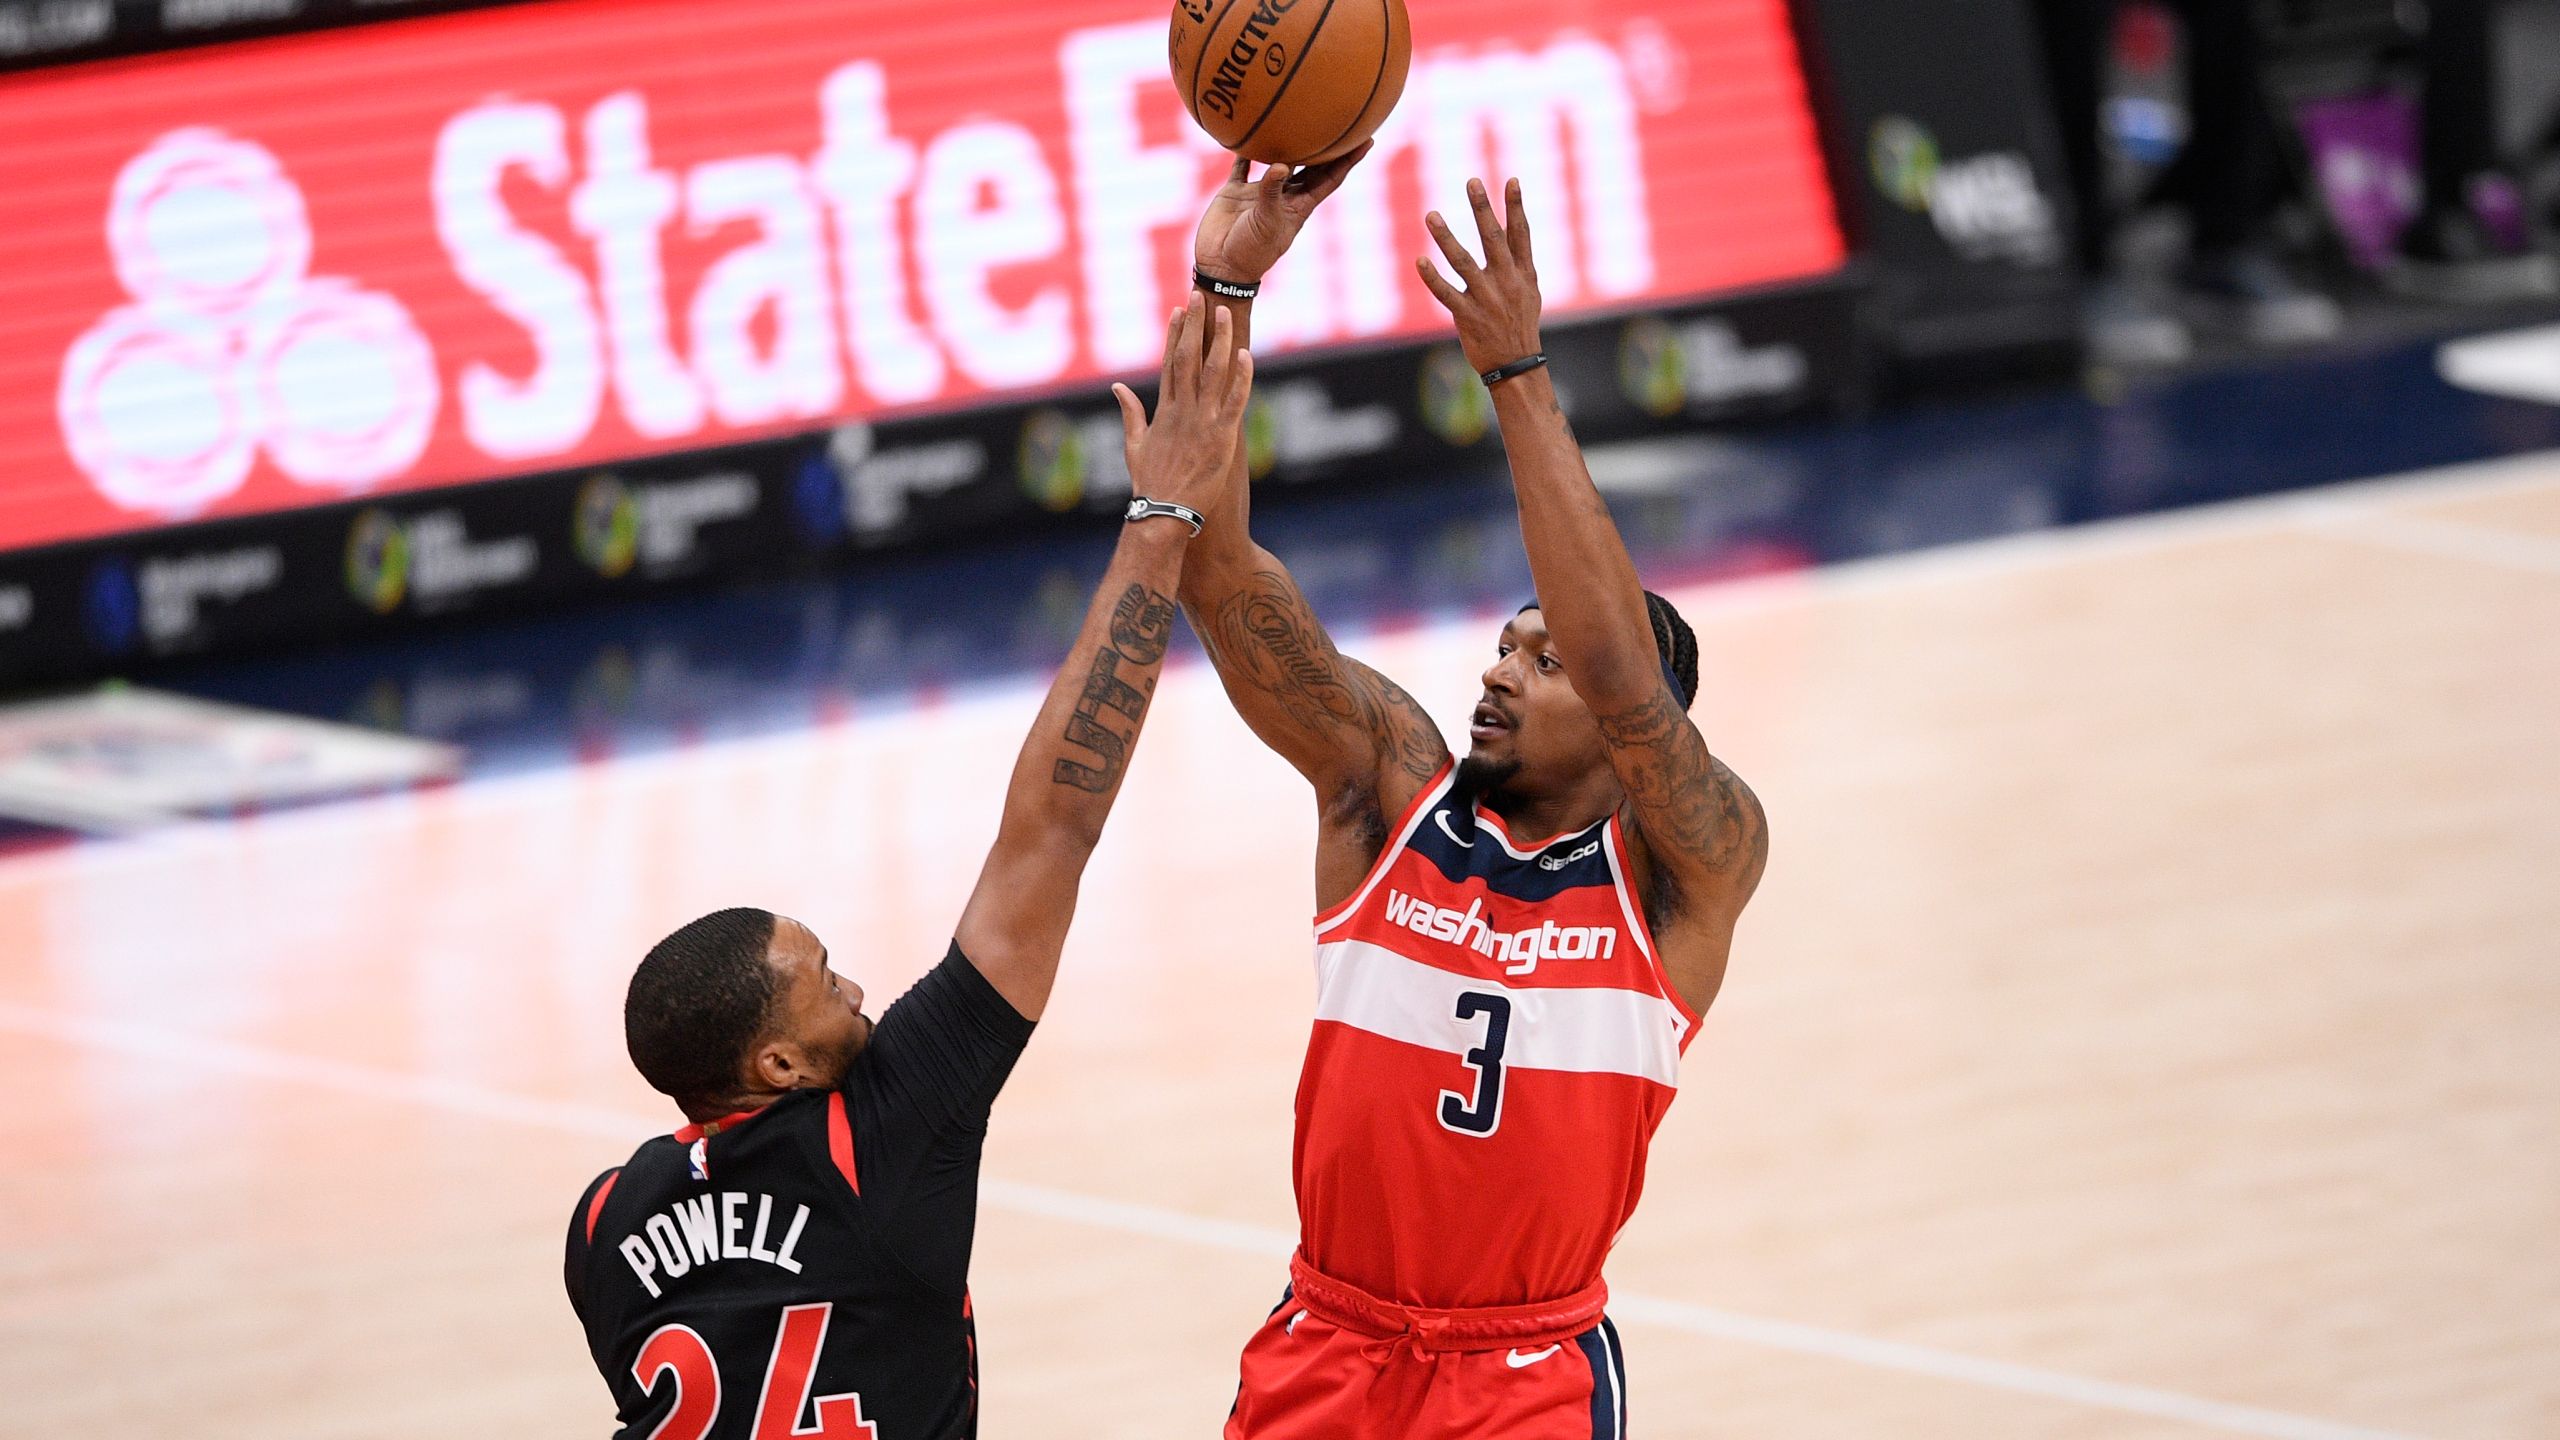 Wizards to rest scoring leader Beal for 1st time this season